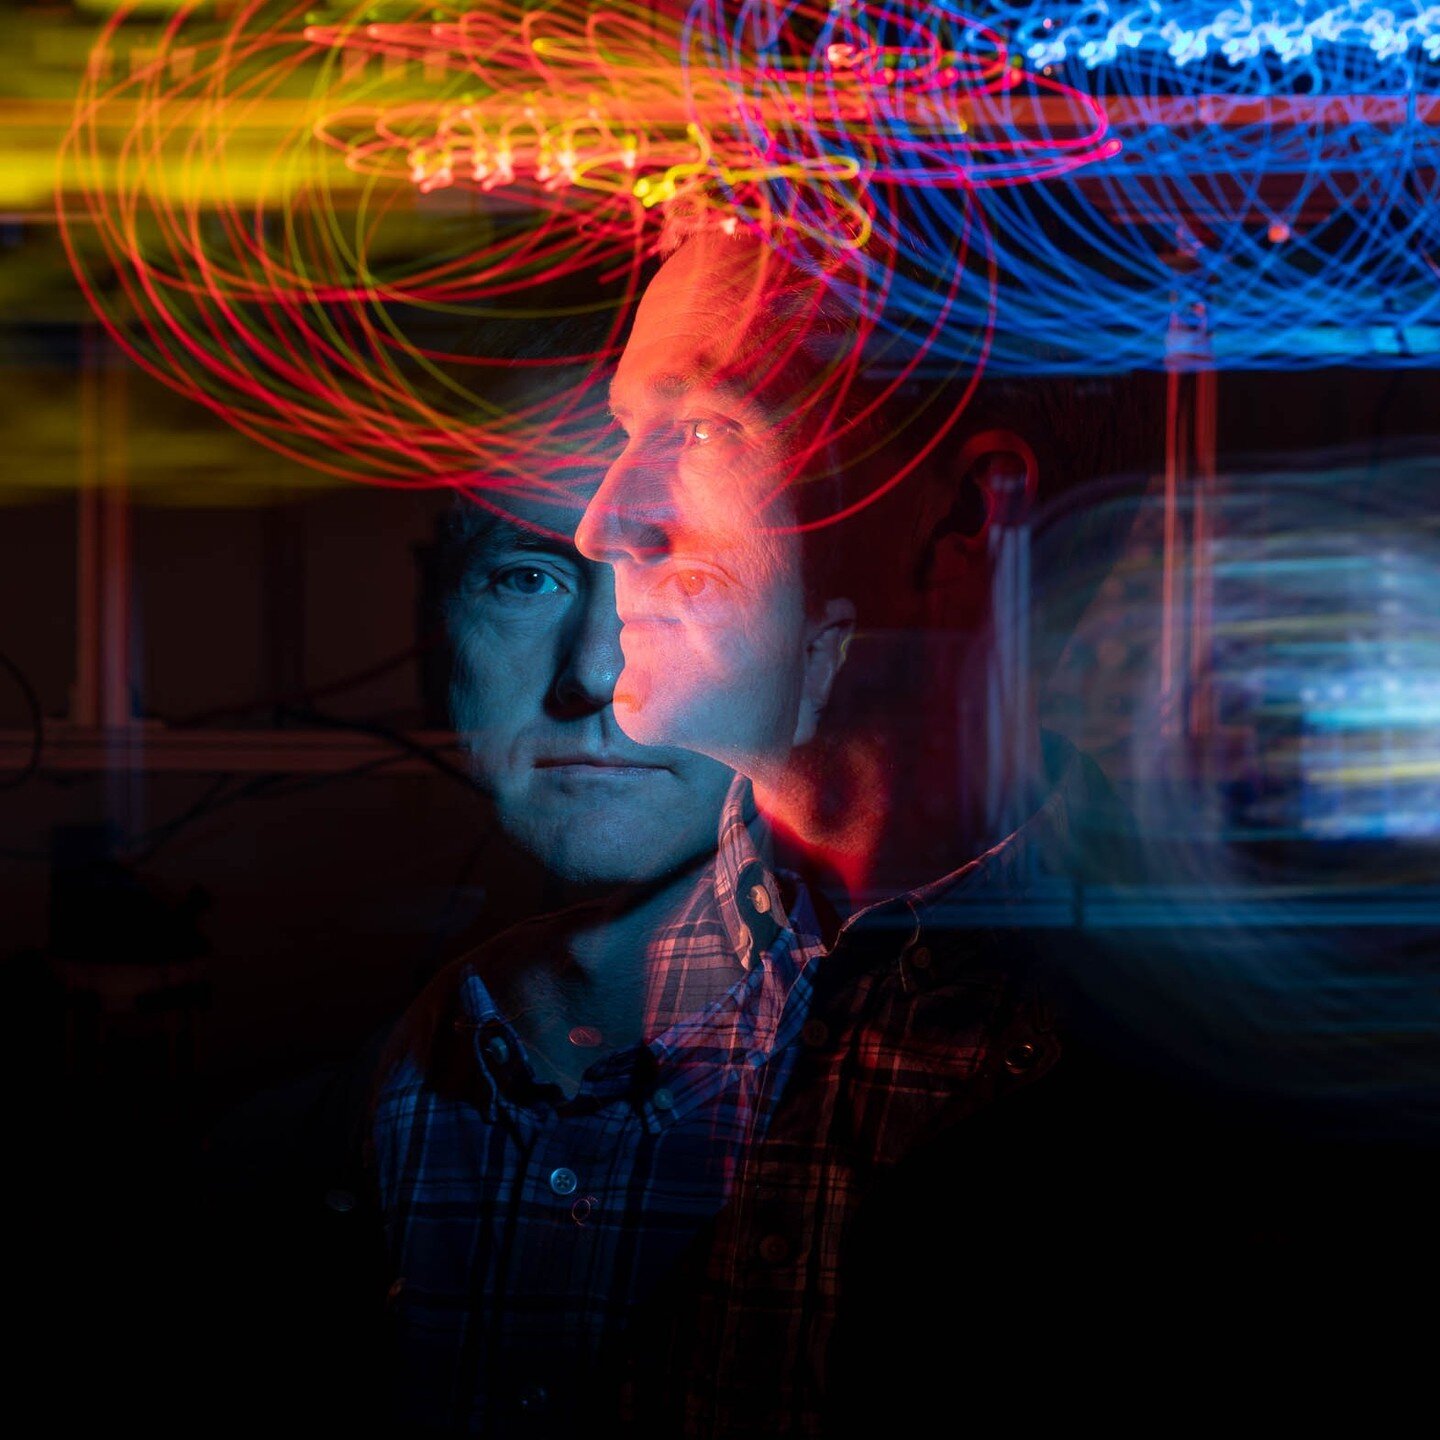 For UC Santa Barbara Magazine, the folks who are doing cutting edge quantum physics research.

The faculty portraits were done with an in-camera double exposure by using a long exposure in a dark room coupled with 2 different lights fired separately.